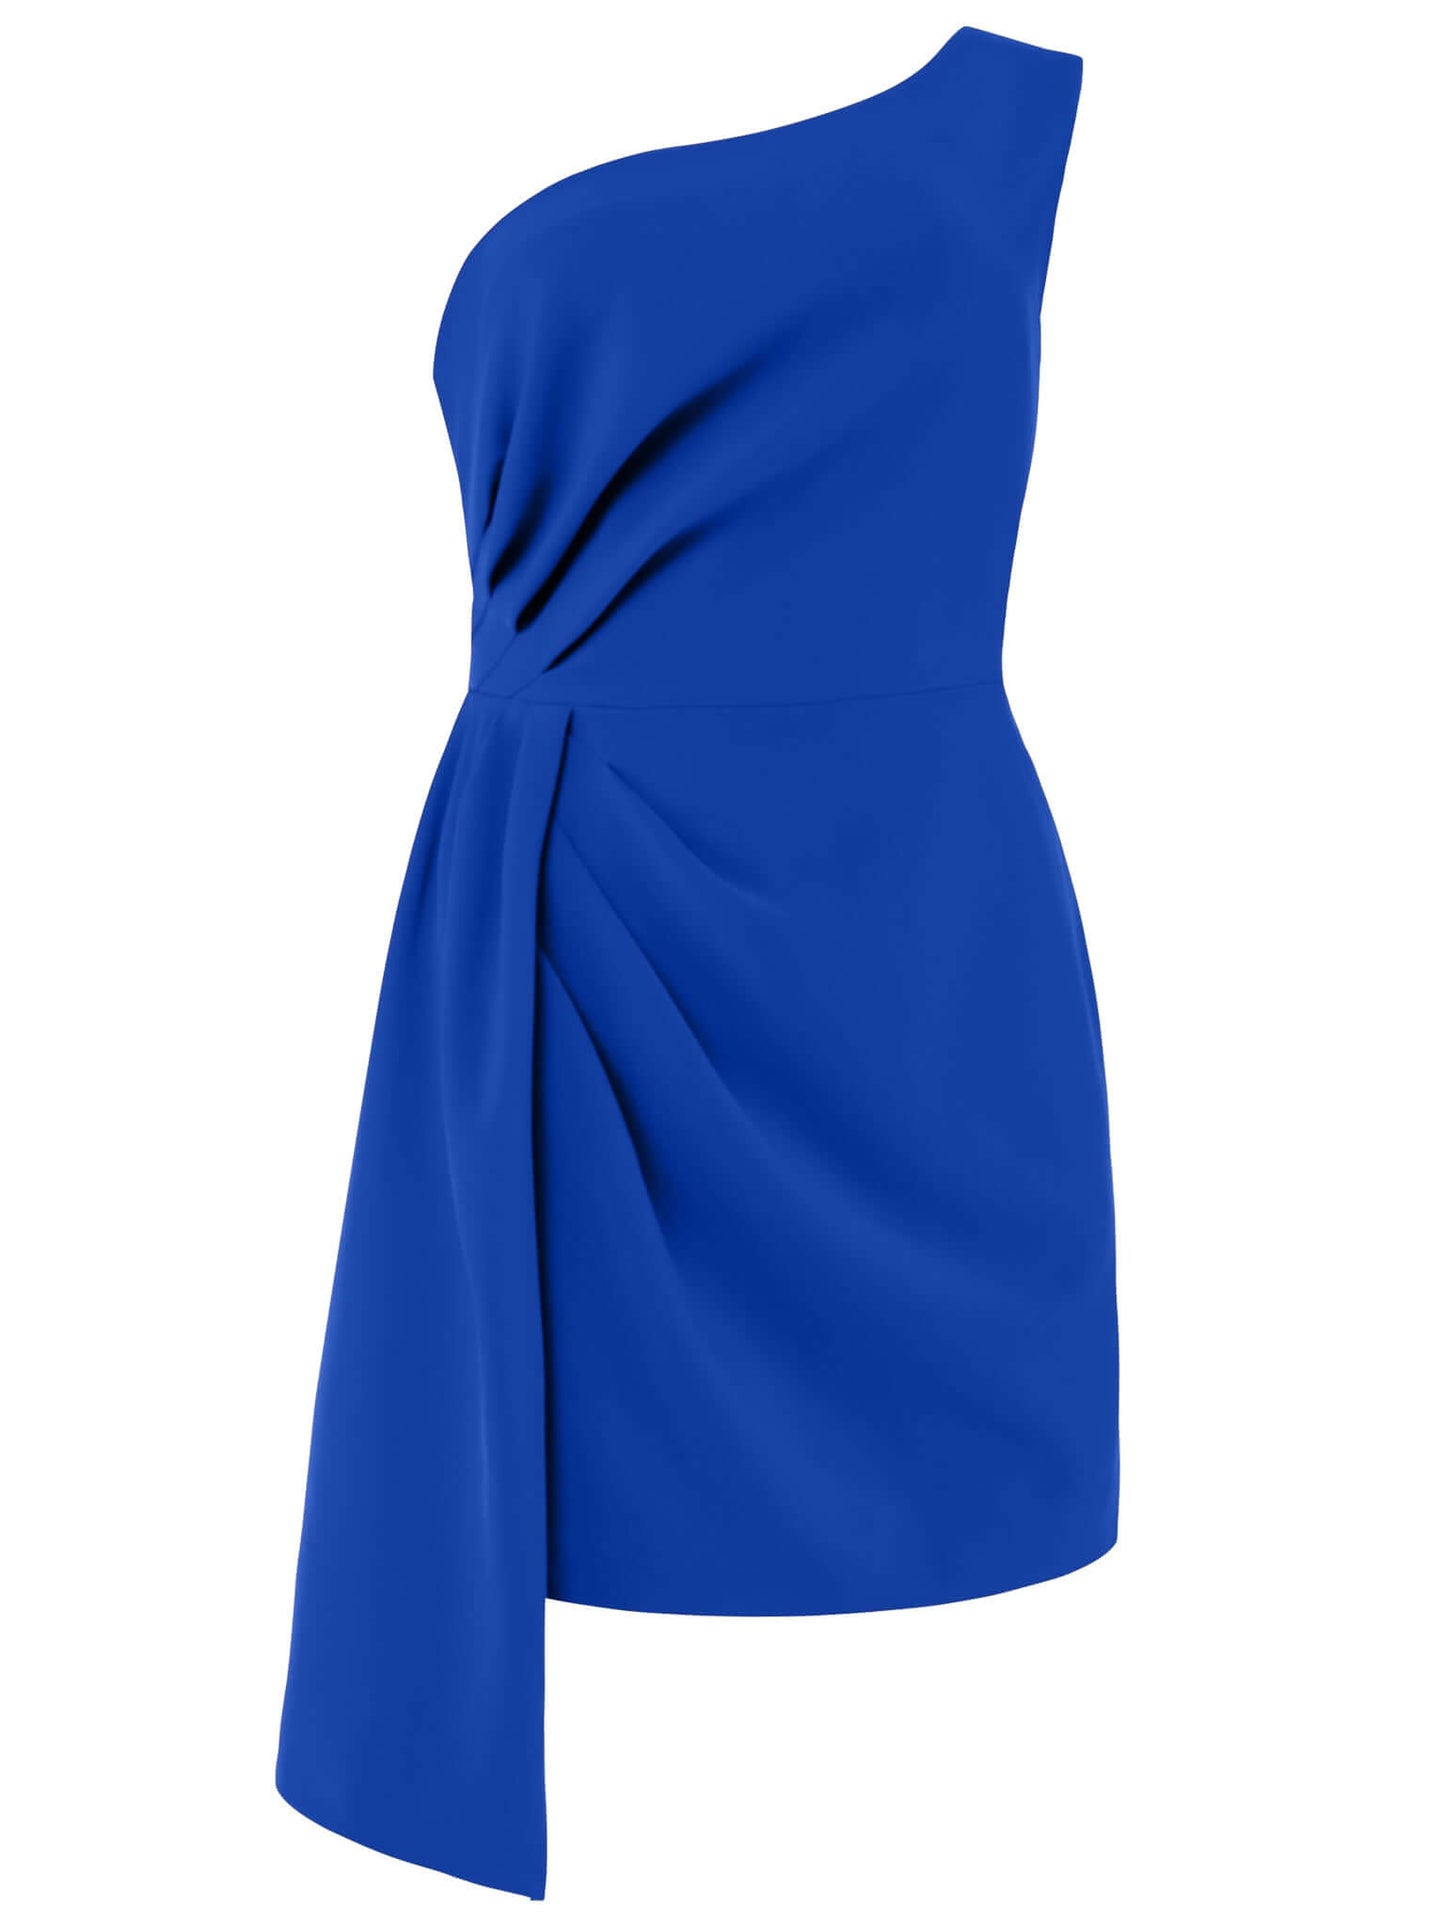 Tia Dorraine Iconic Glamour Draped Short Dress - Azure Blue Tia Dorraine’s artful creations such as this dress are made to be reserved for important moments. Crafted from stretch crepe, this dress channels old Hollywood glam through its draped core and as